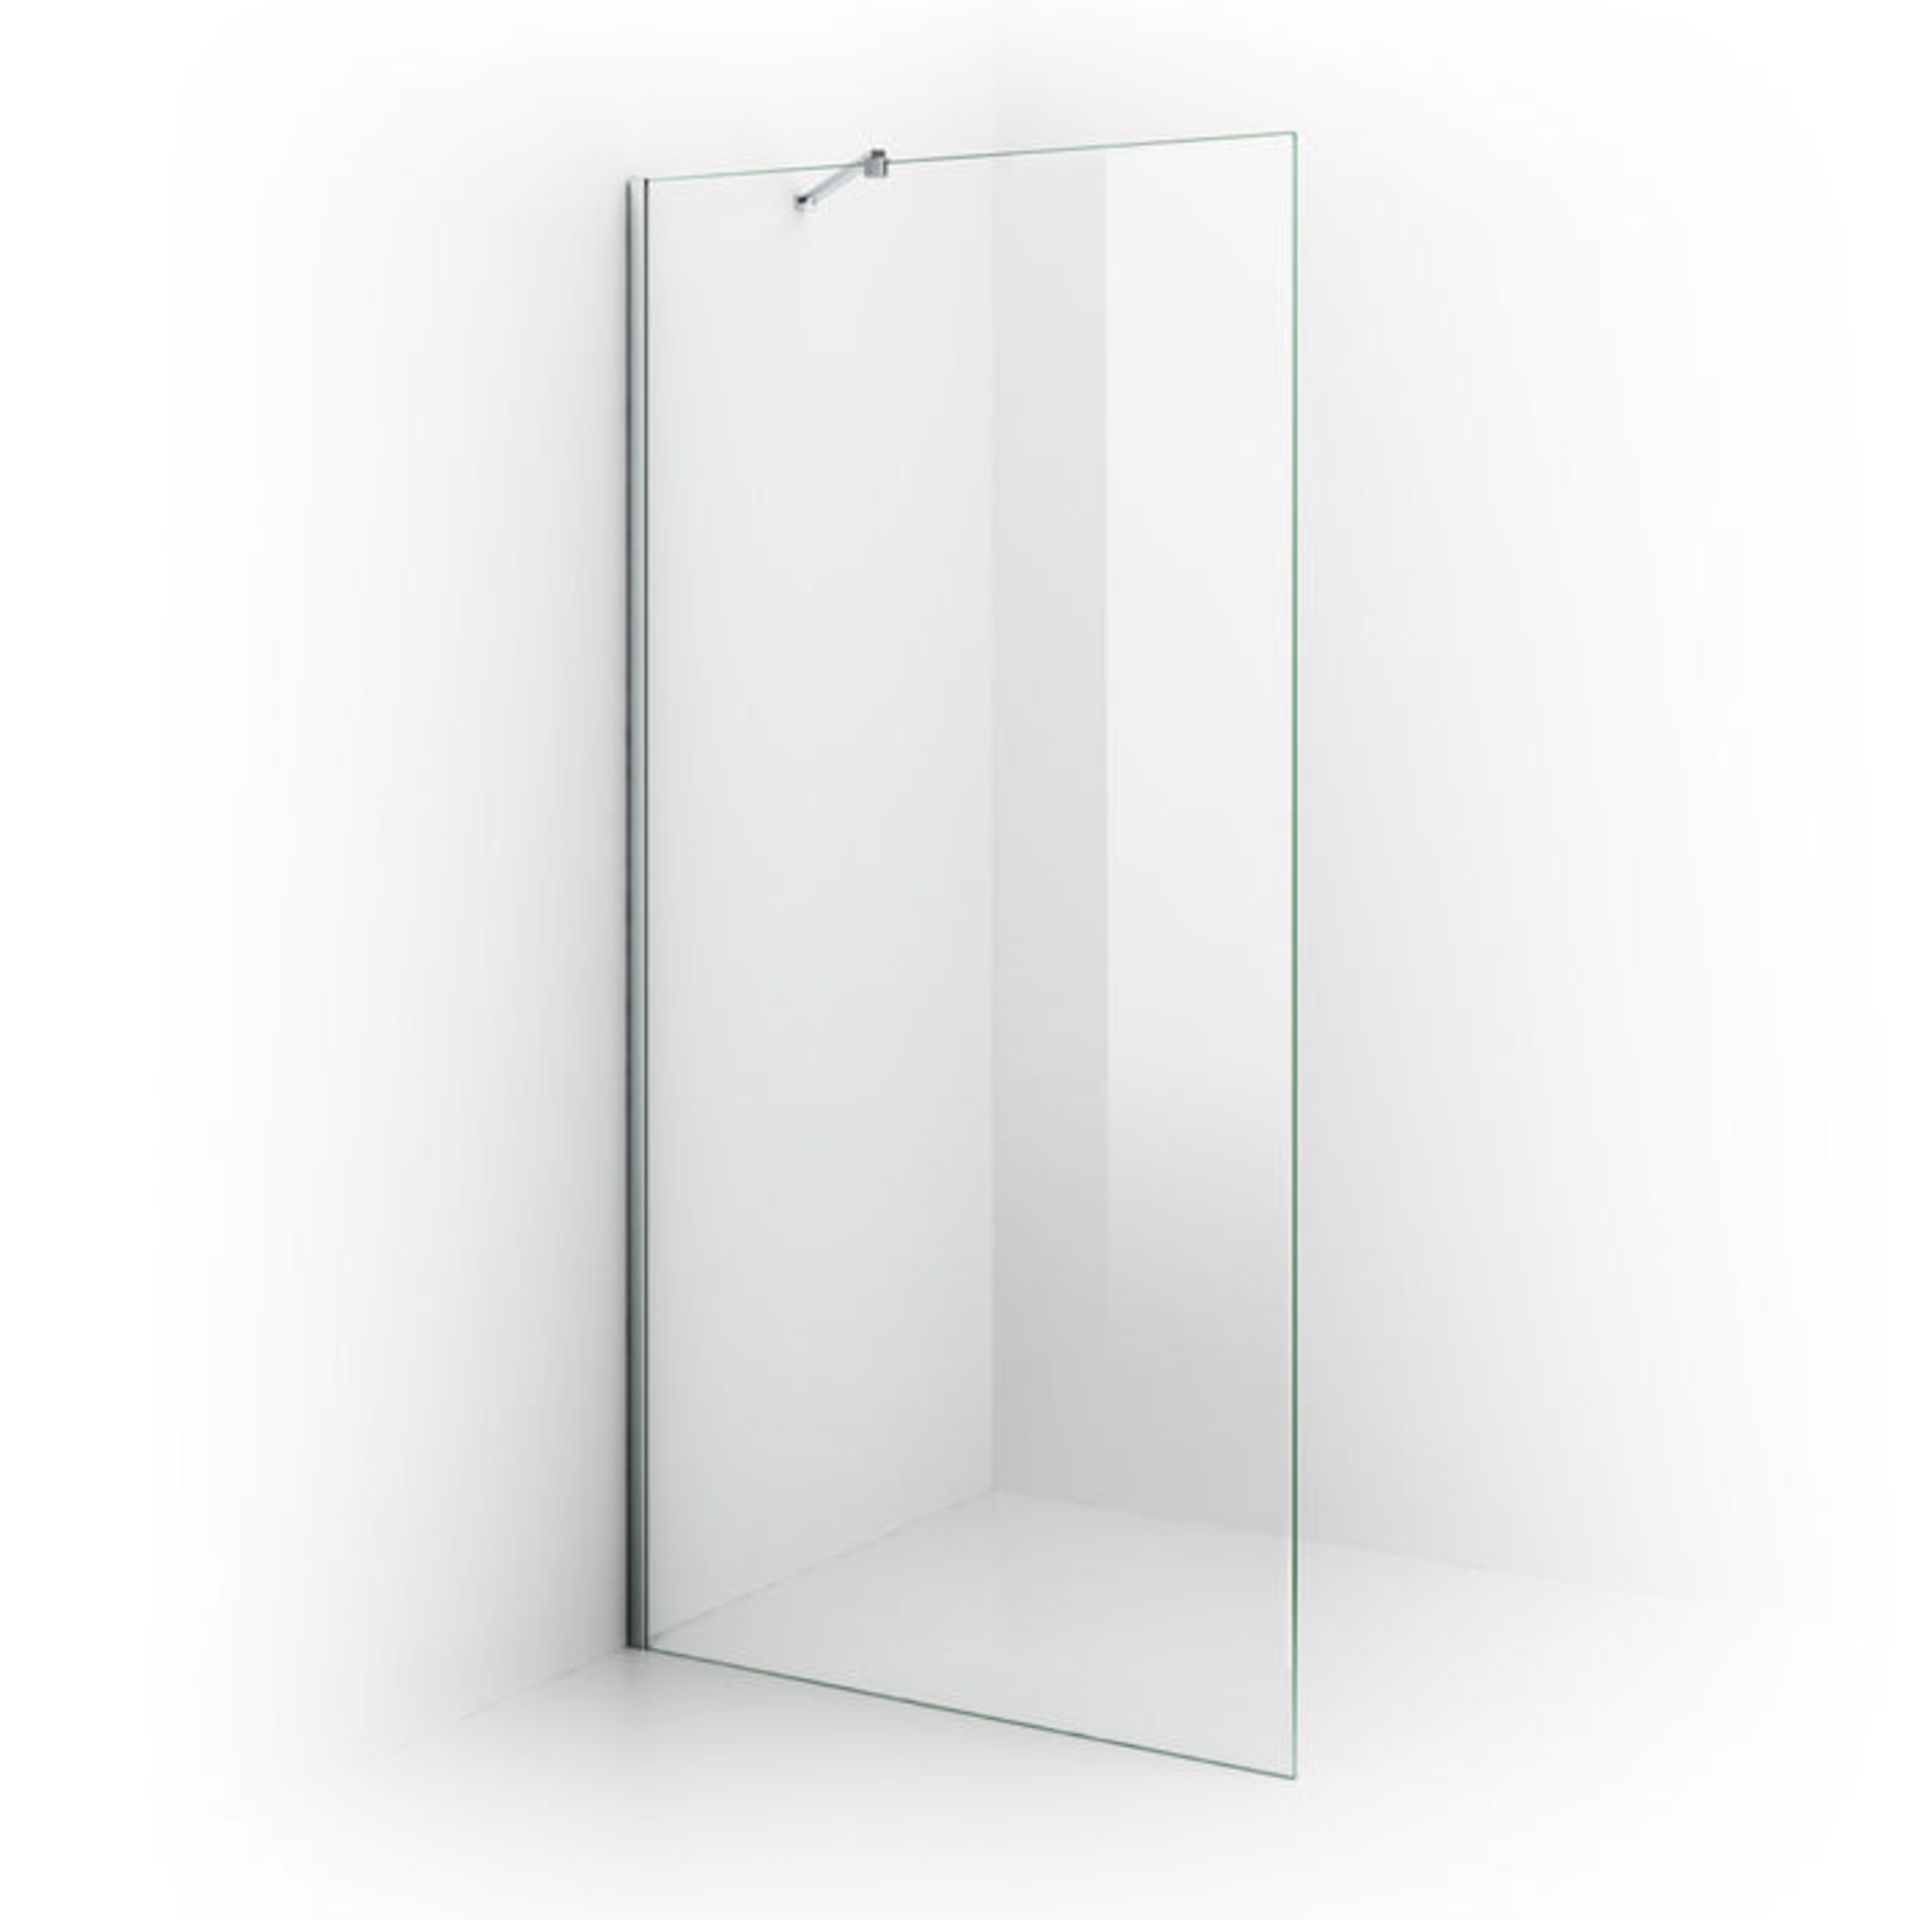 (XS310) 1200mm - 8mm - Premium EasyClean Wetroom Panel. RRP £499.99. 8mm EasyClean glass - Our glass - Image 4 of 5